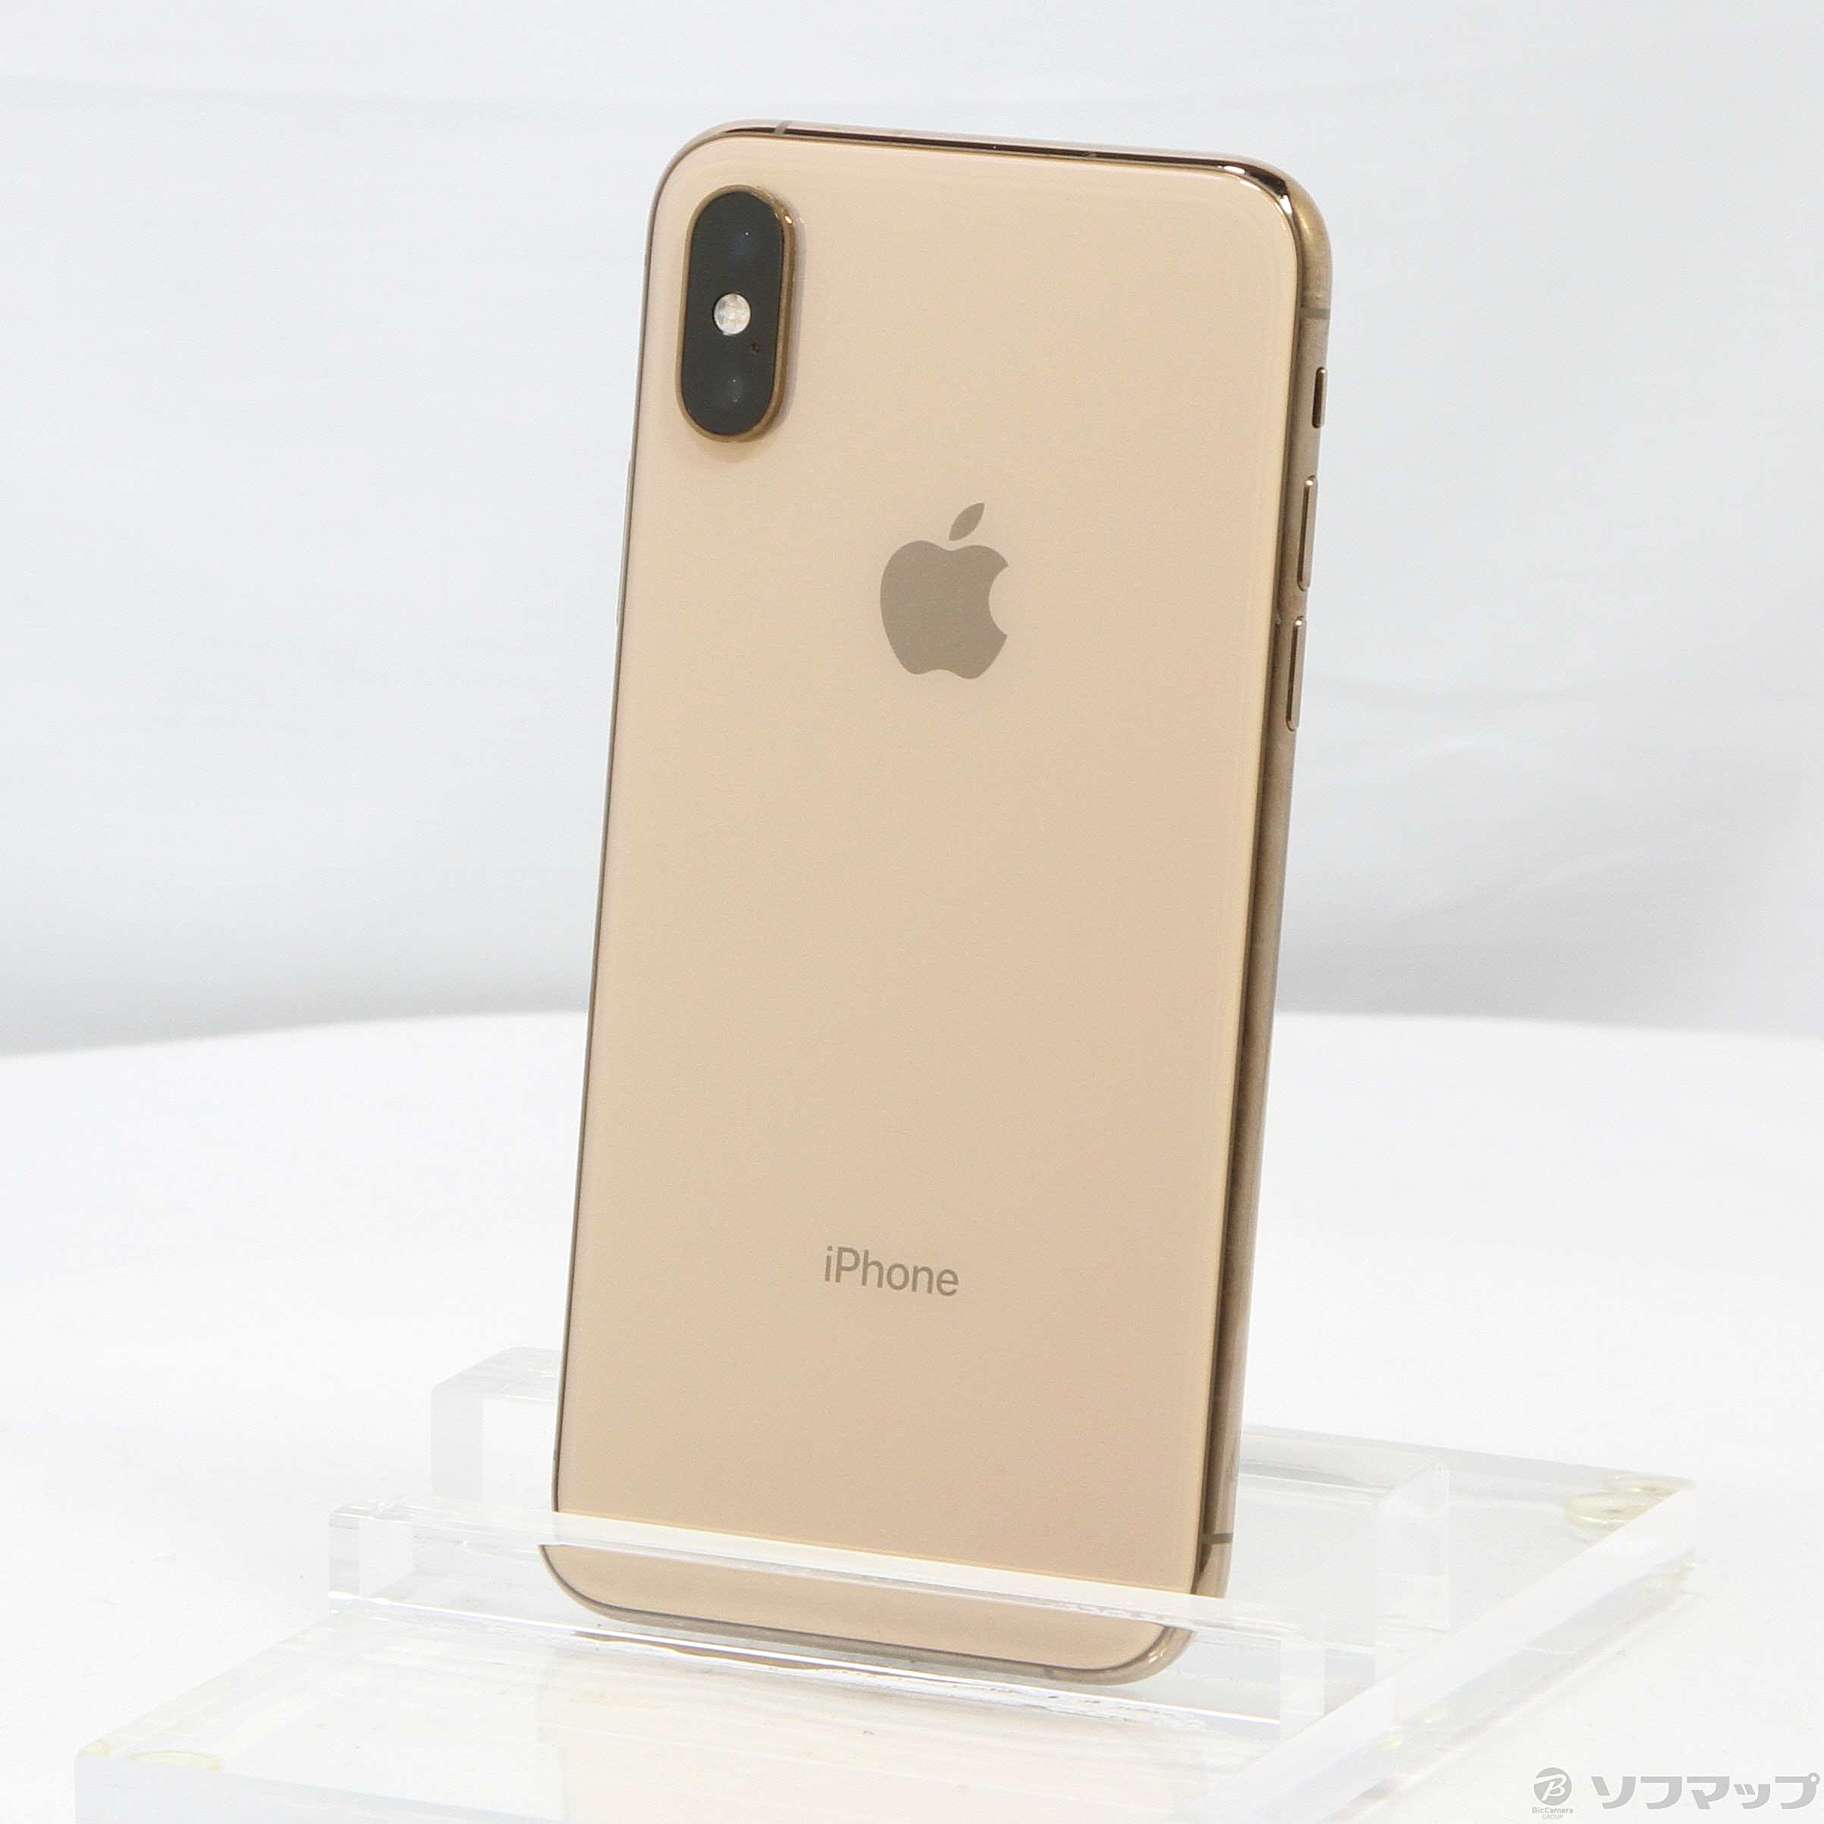 iPhone Xs Gold 256 GB ソフトバンク